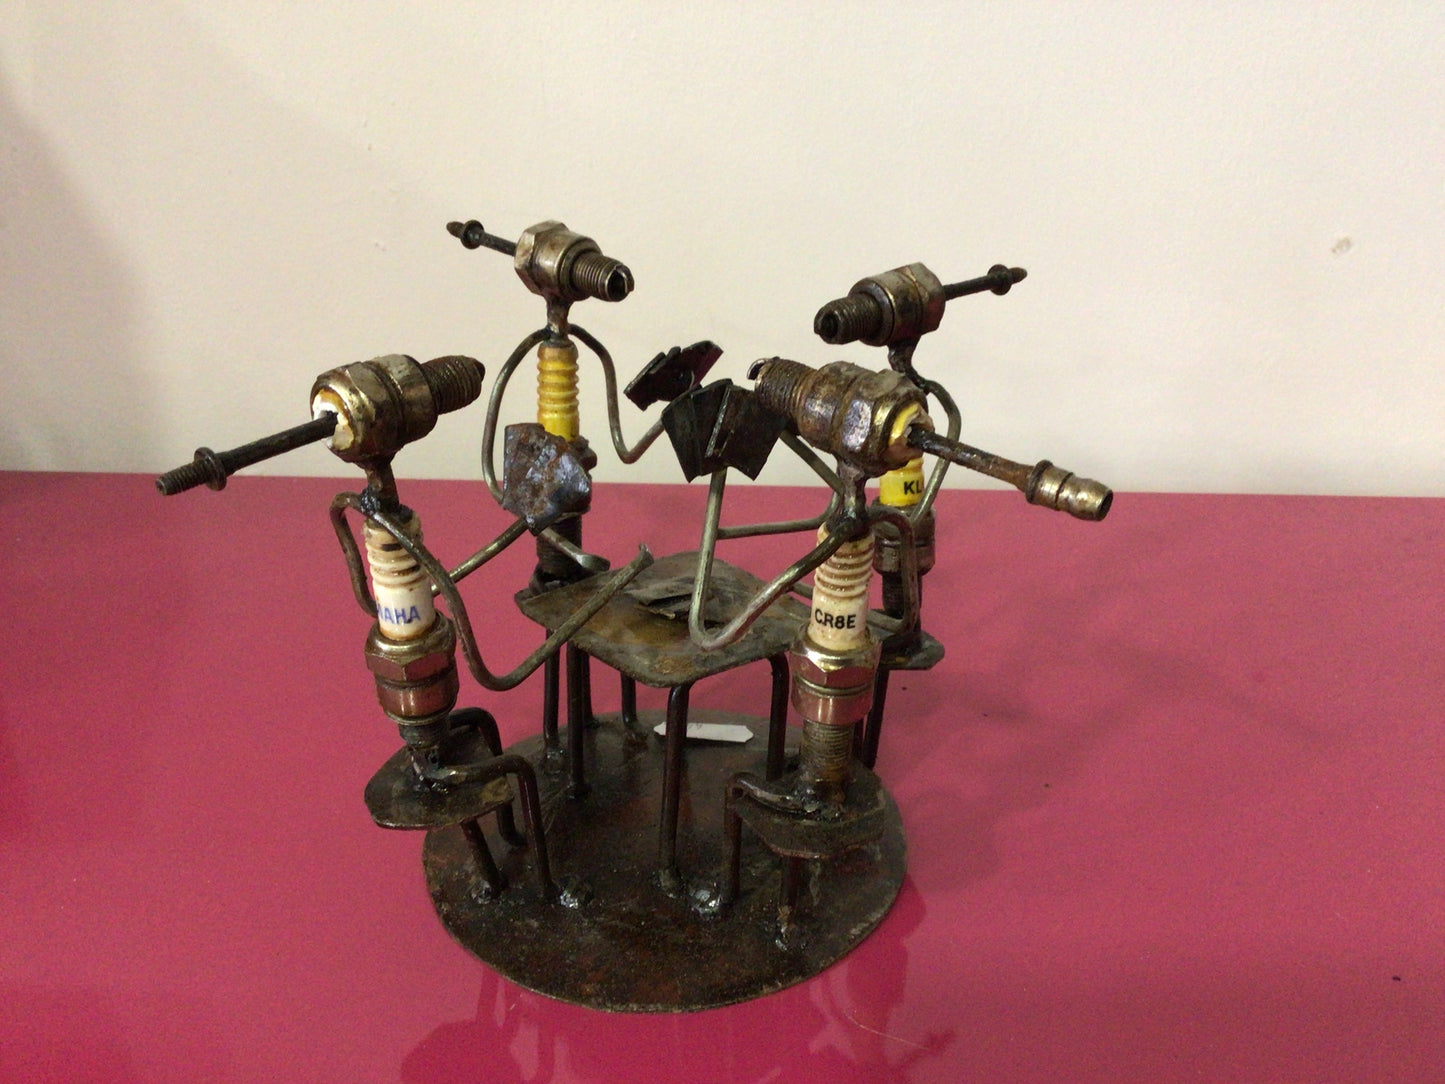 Figurines with candles and recycled materials